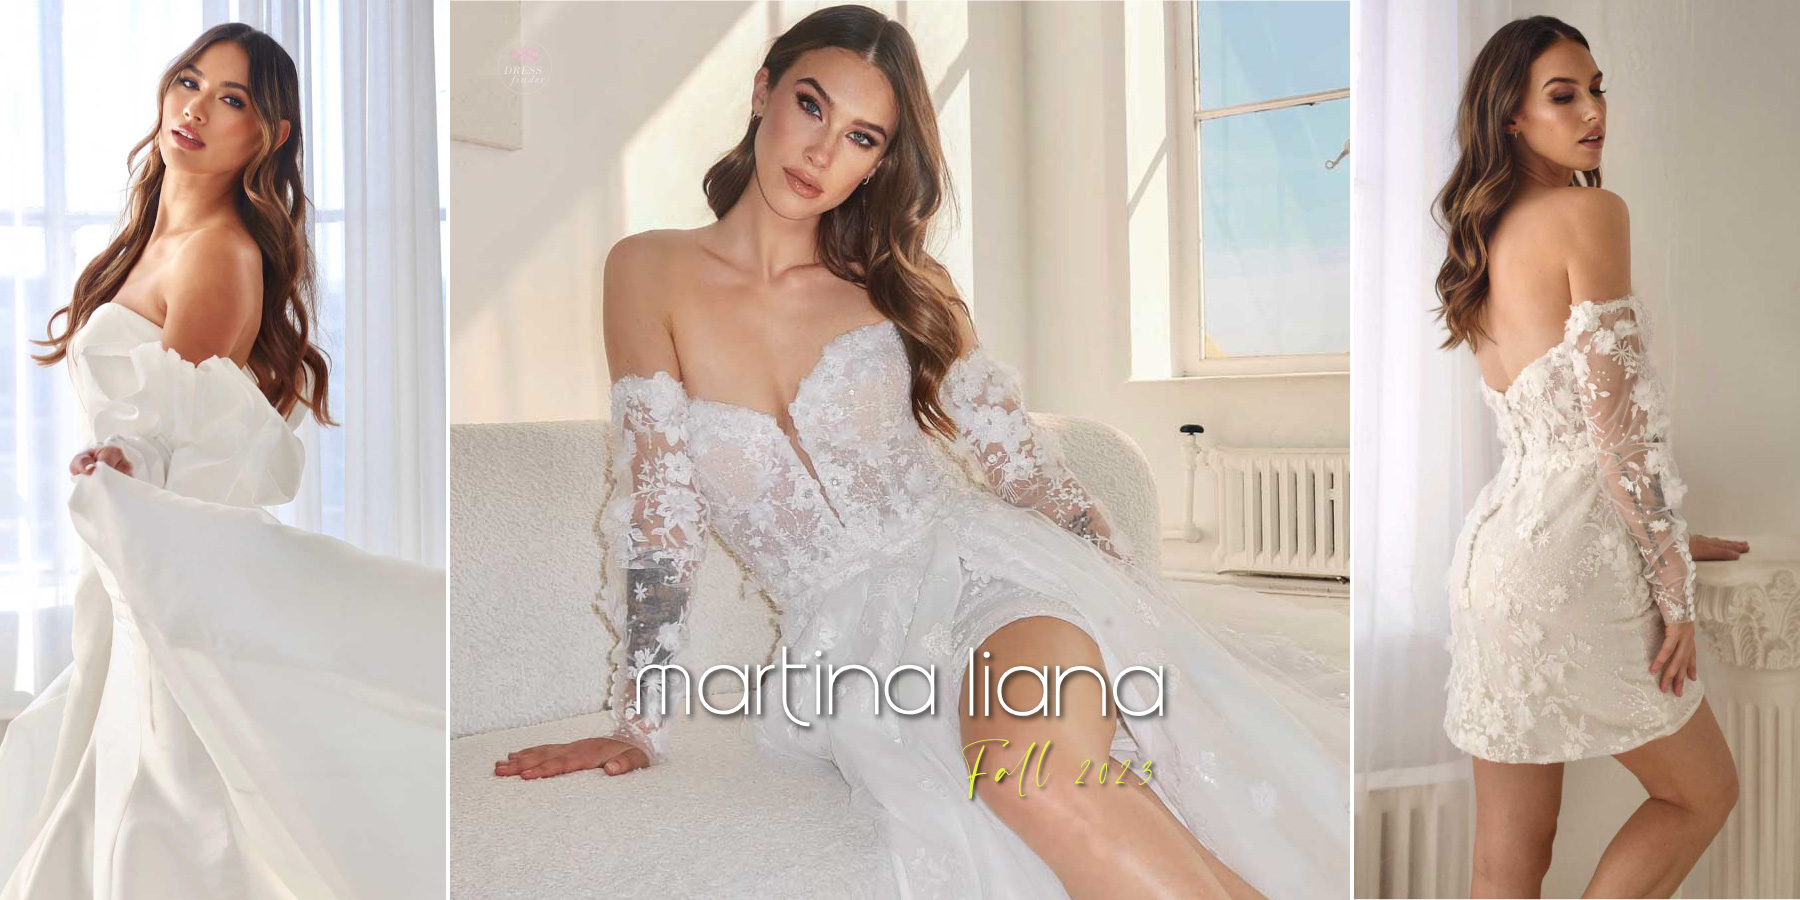 https://www.bridalnetwork.net/Images/CollectionCollages/290/Collage-290-2023-10-14-MartinaLiana.jpg